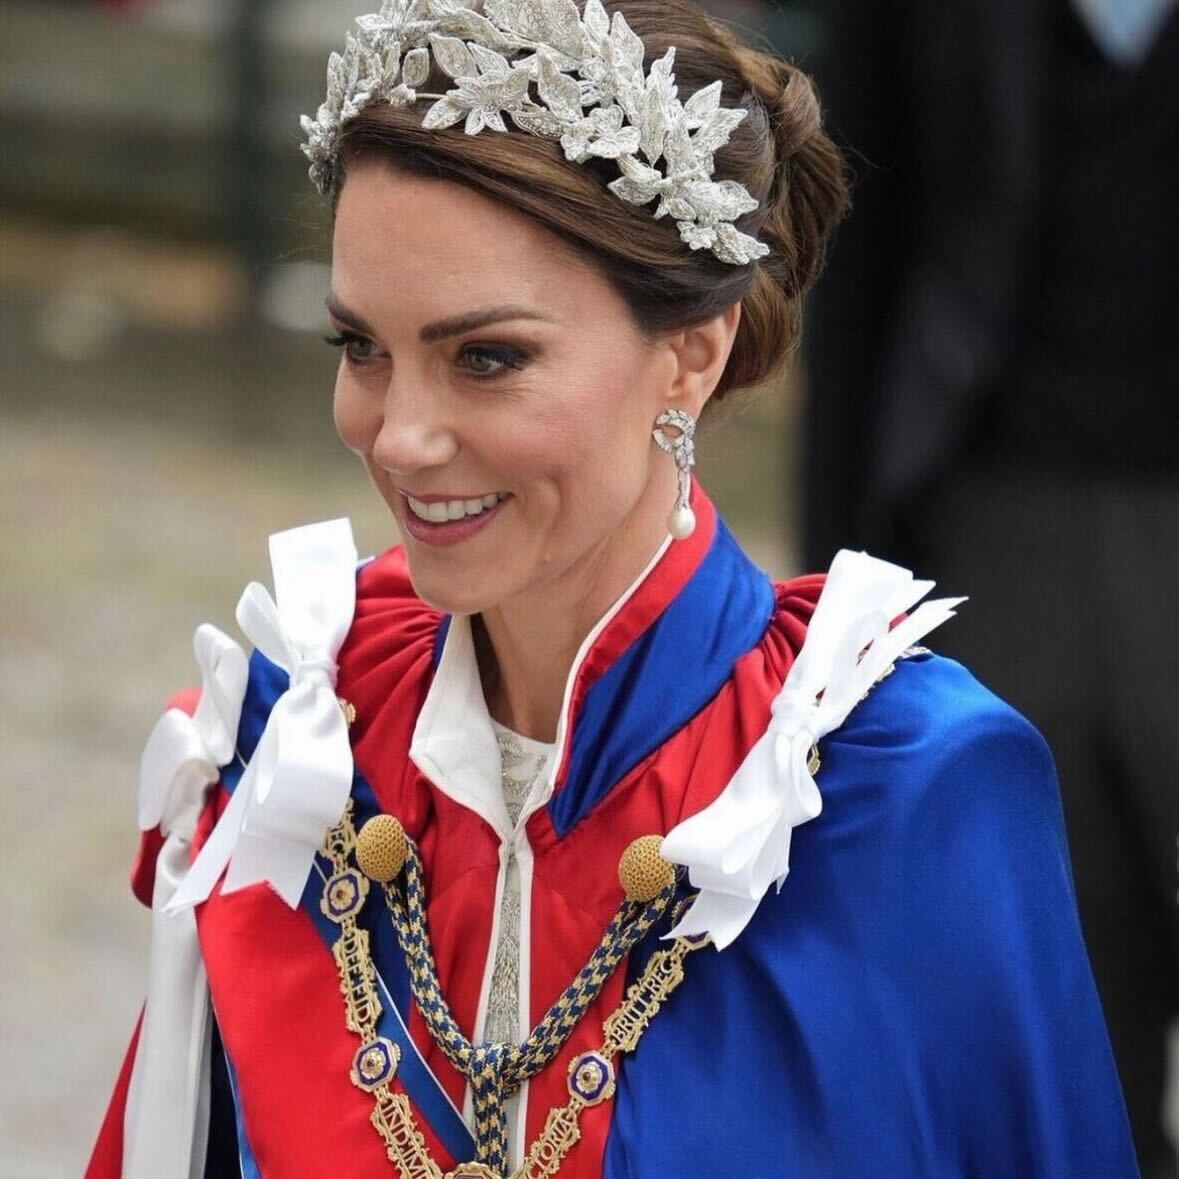 The royal ladies wore some sentimental jewels to the coronation – but ...